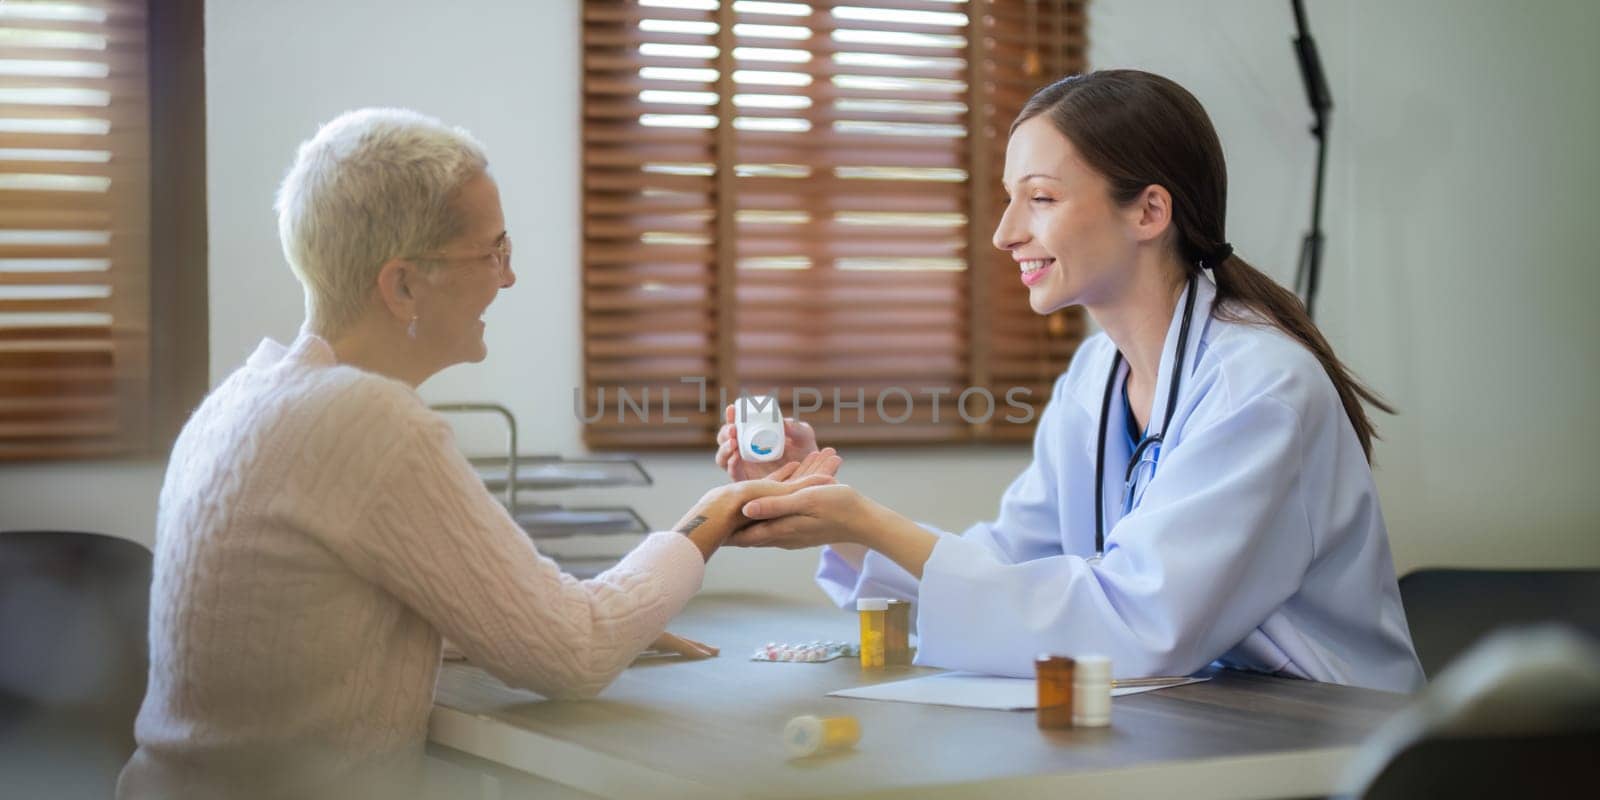 doctor discussion results or symptoms and gives Give advice about medicine to a senior women patient, giving consultation during medical examination in clinic.